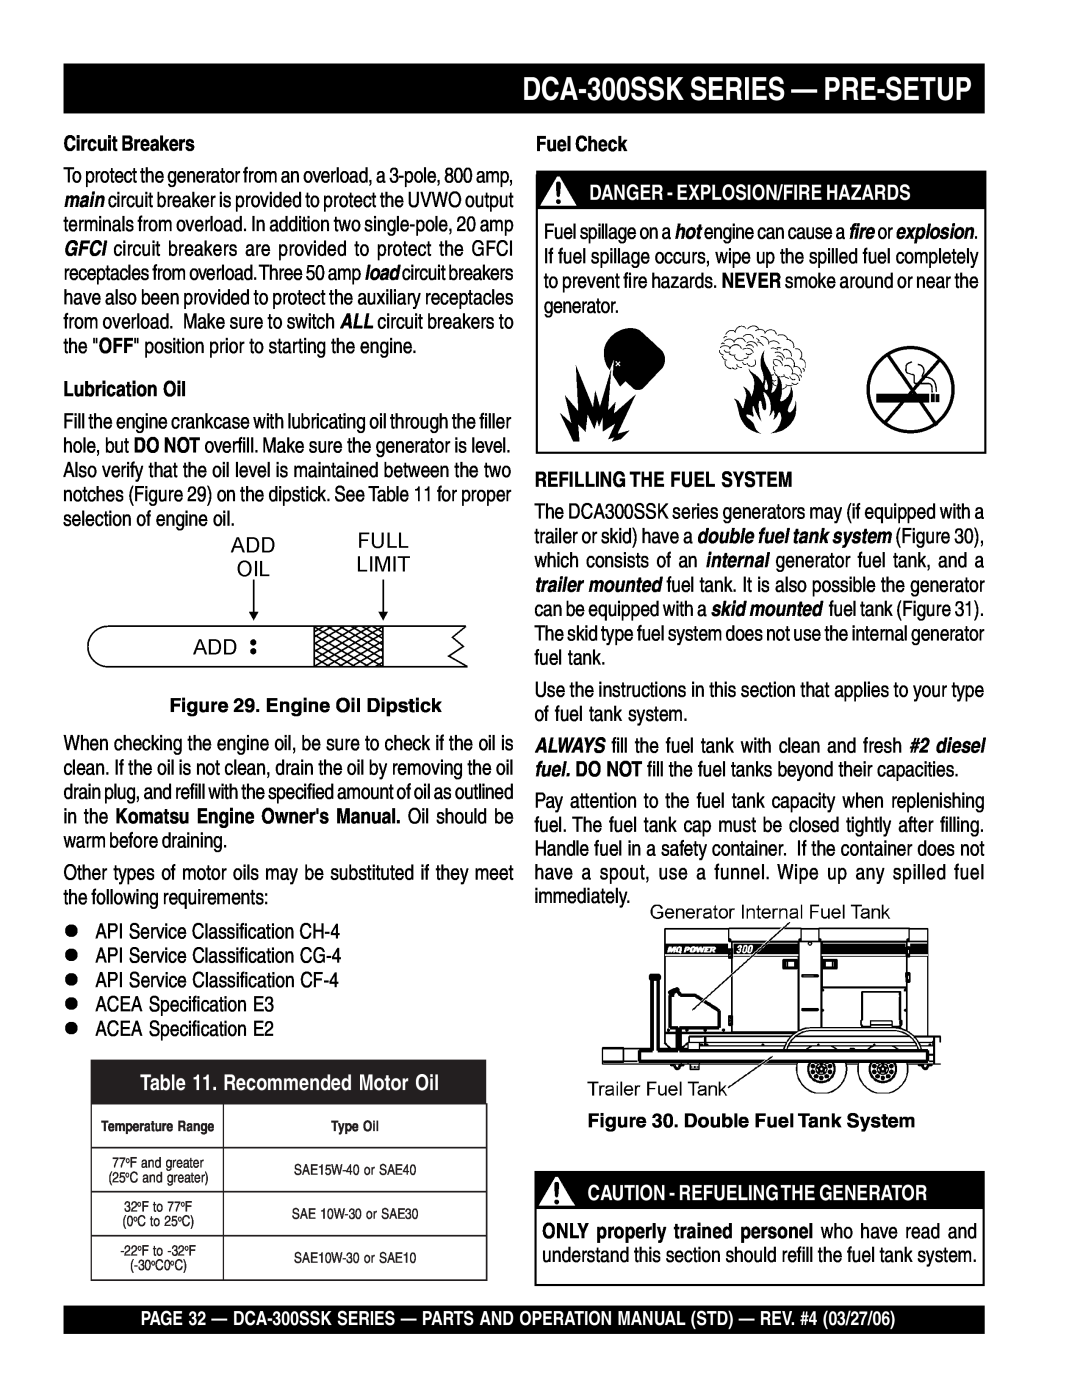 Multiquip manual DCA-300SSK SERIES - PRE-SETUP, Recommended Motor Oil, Circuit Breakers, Lubrication Oil, Fuel Check 